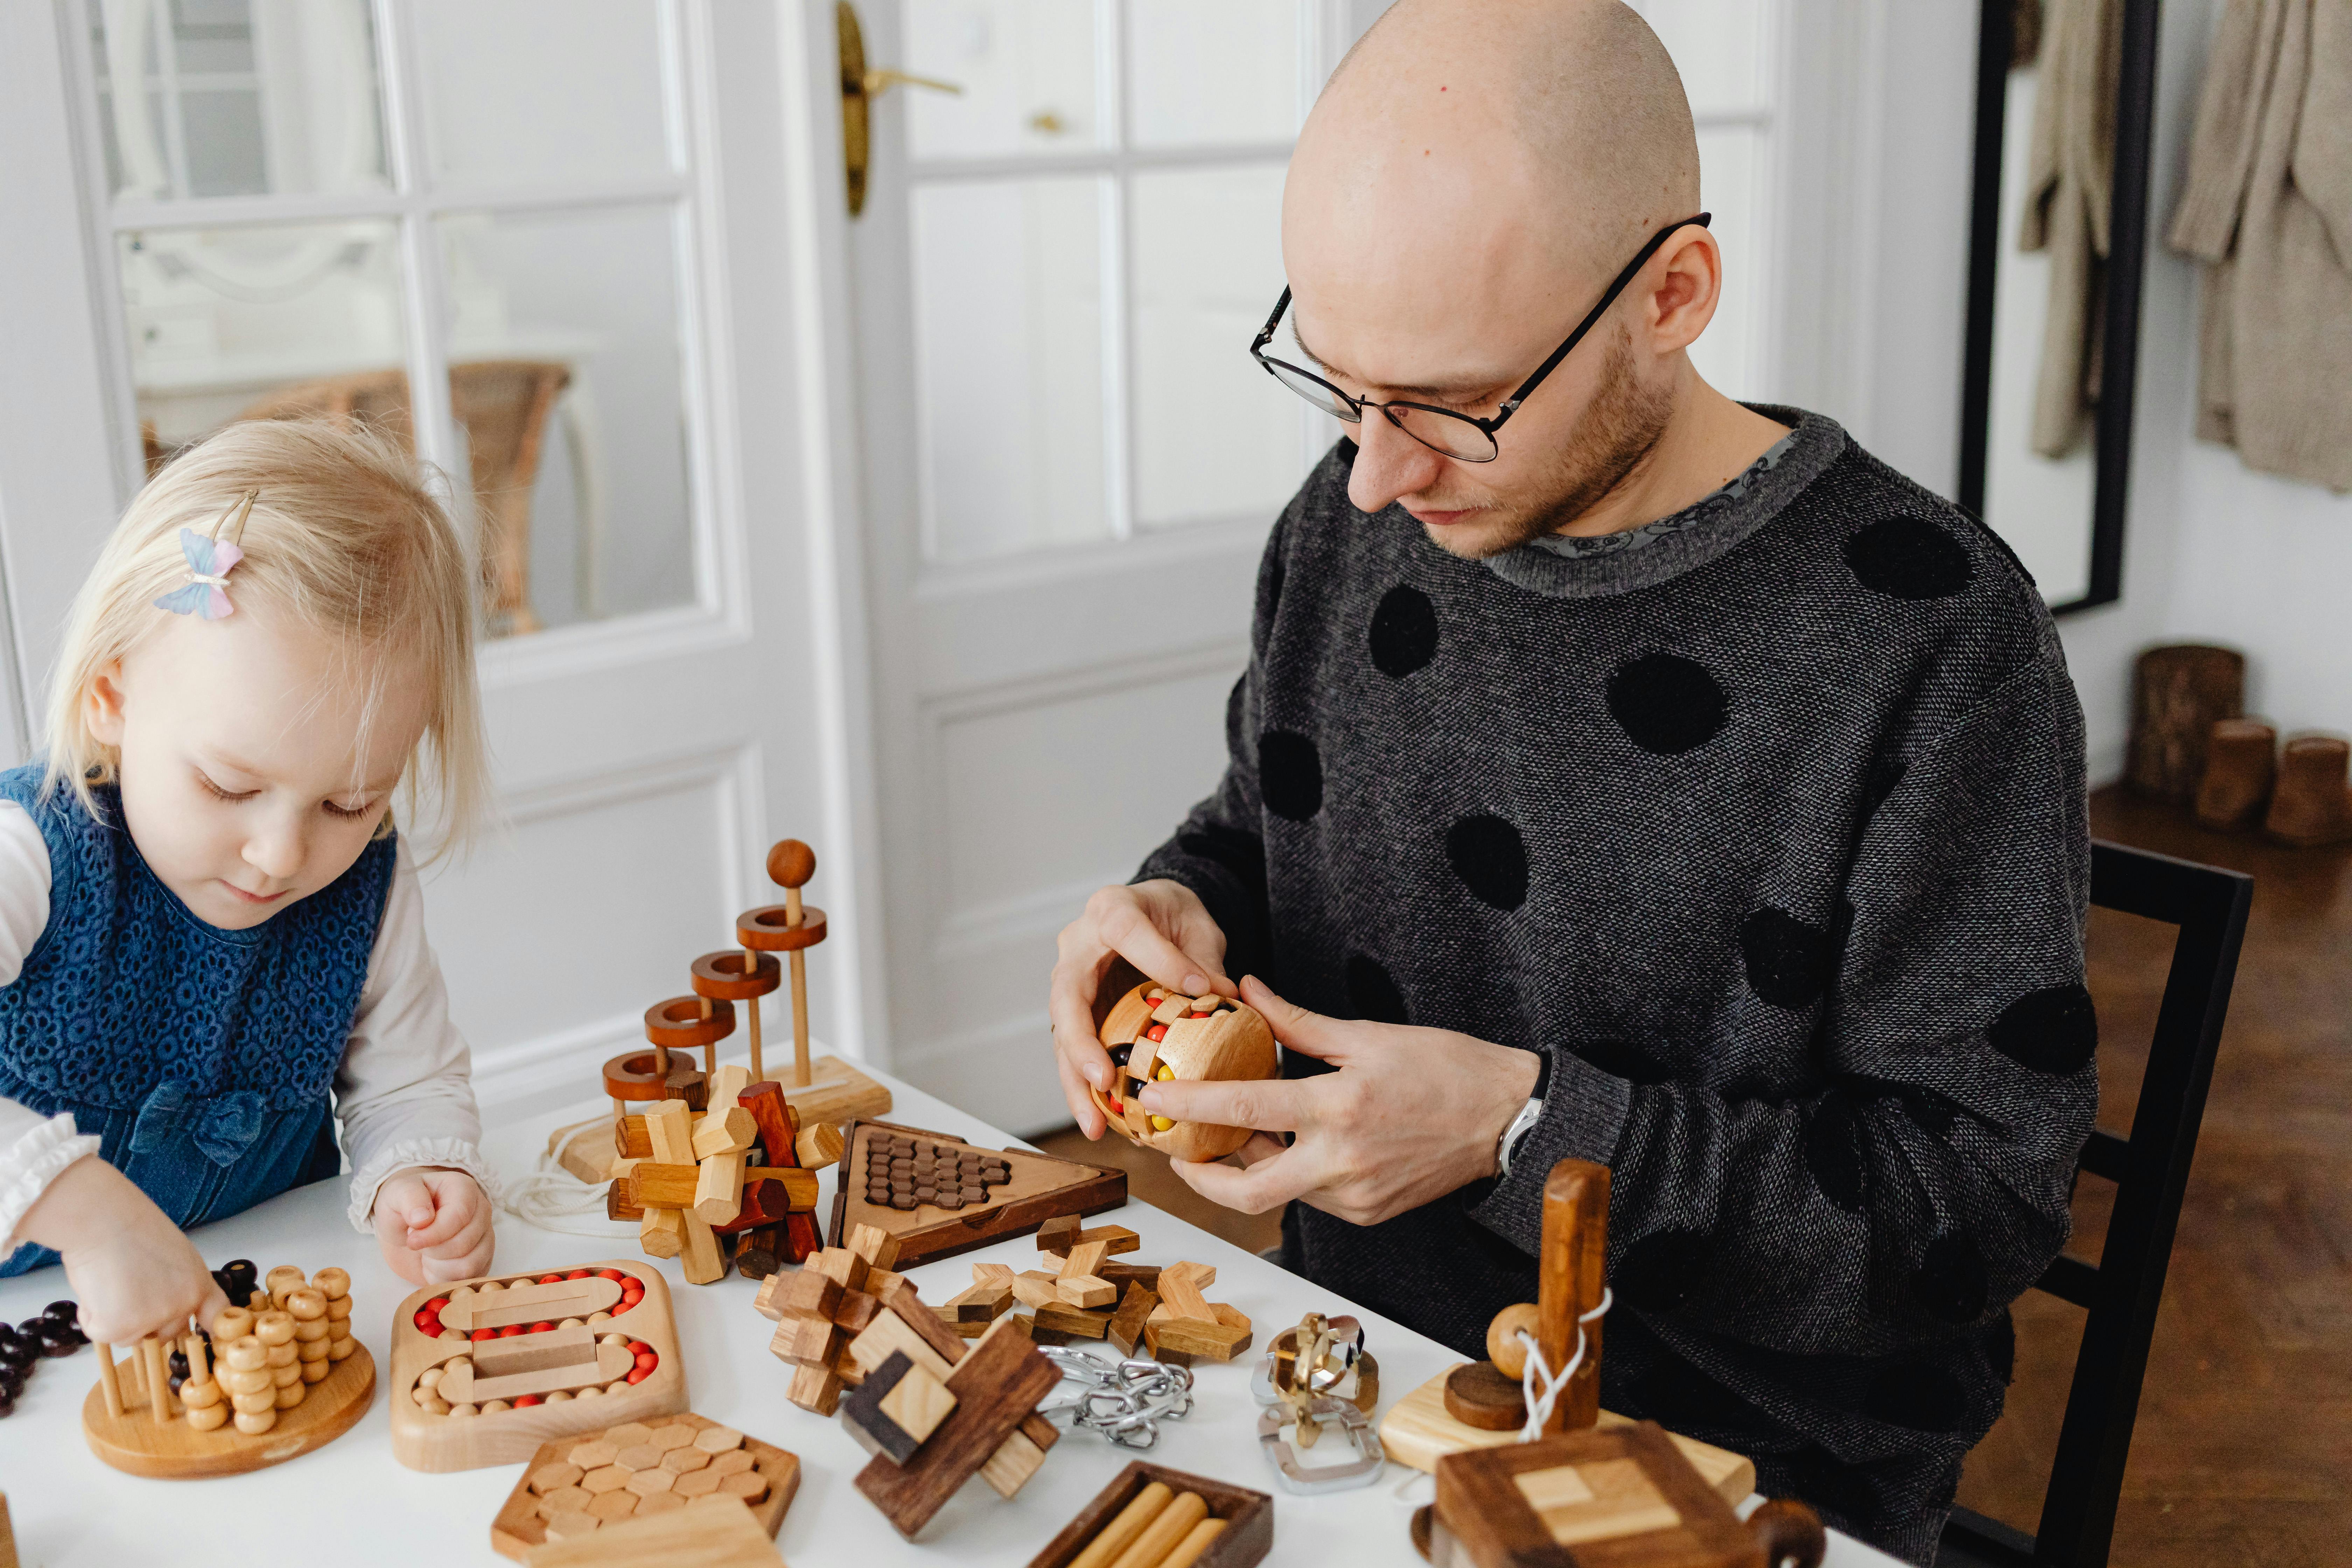 father and child playing wooden game together